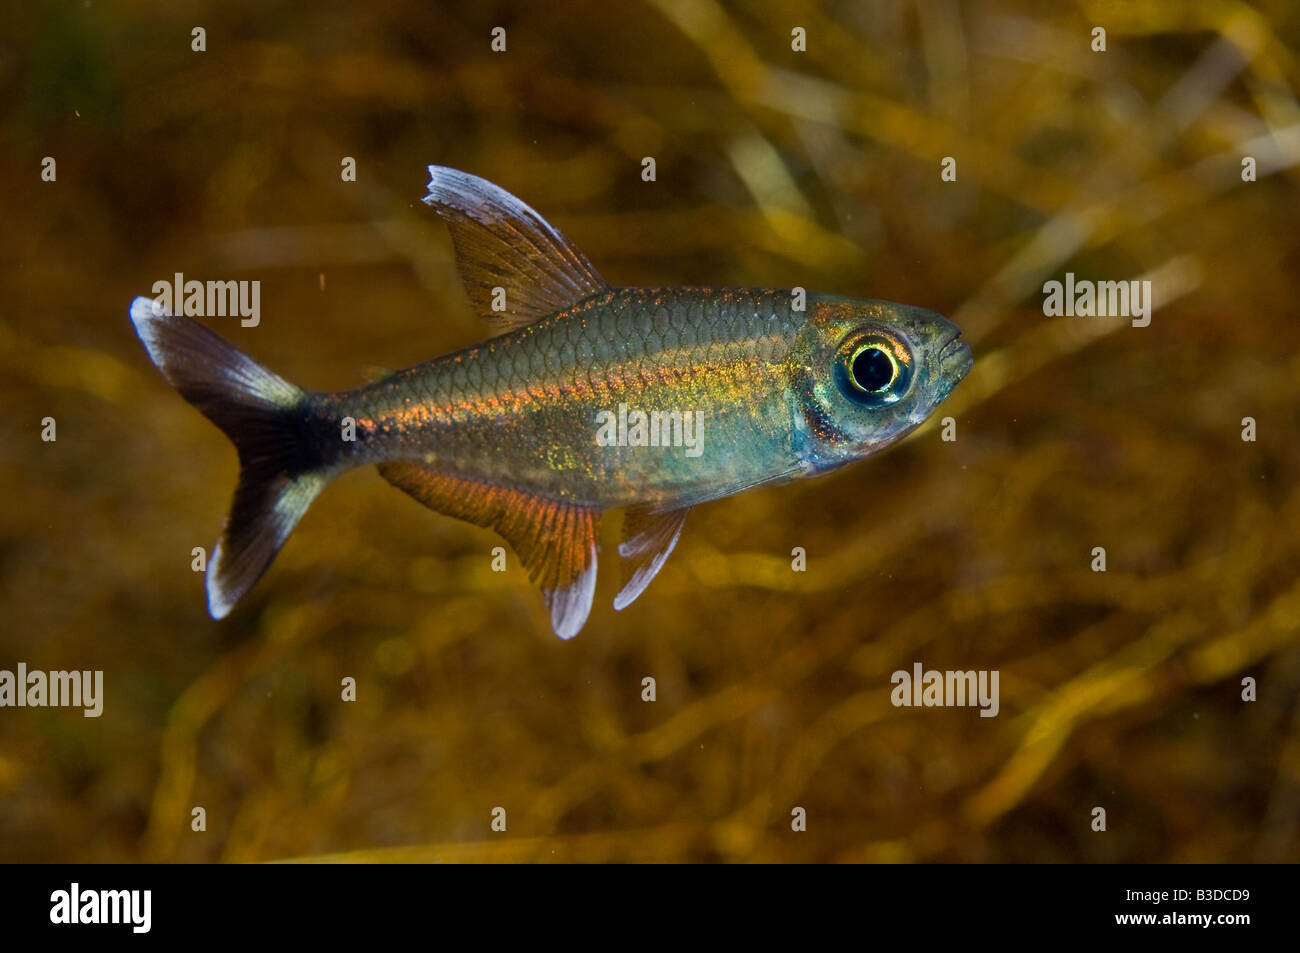 Moenkhausia sp a small tetra part of the Characin family of freshwater fish found throughout Brazil Stock Photo